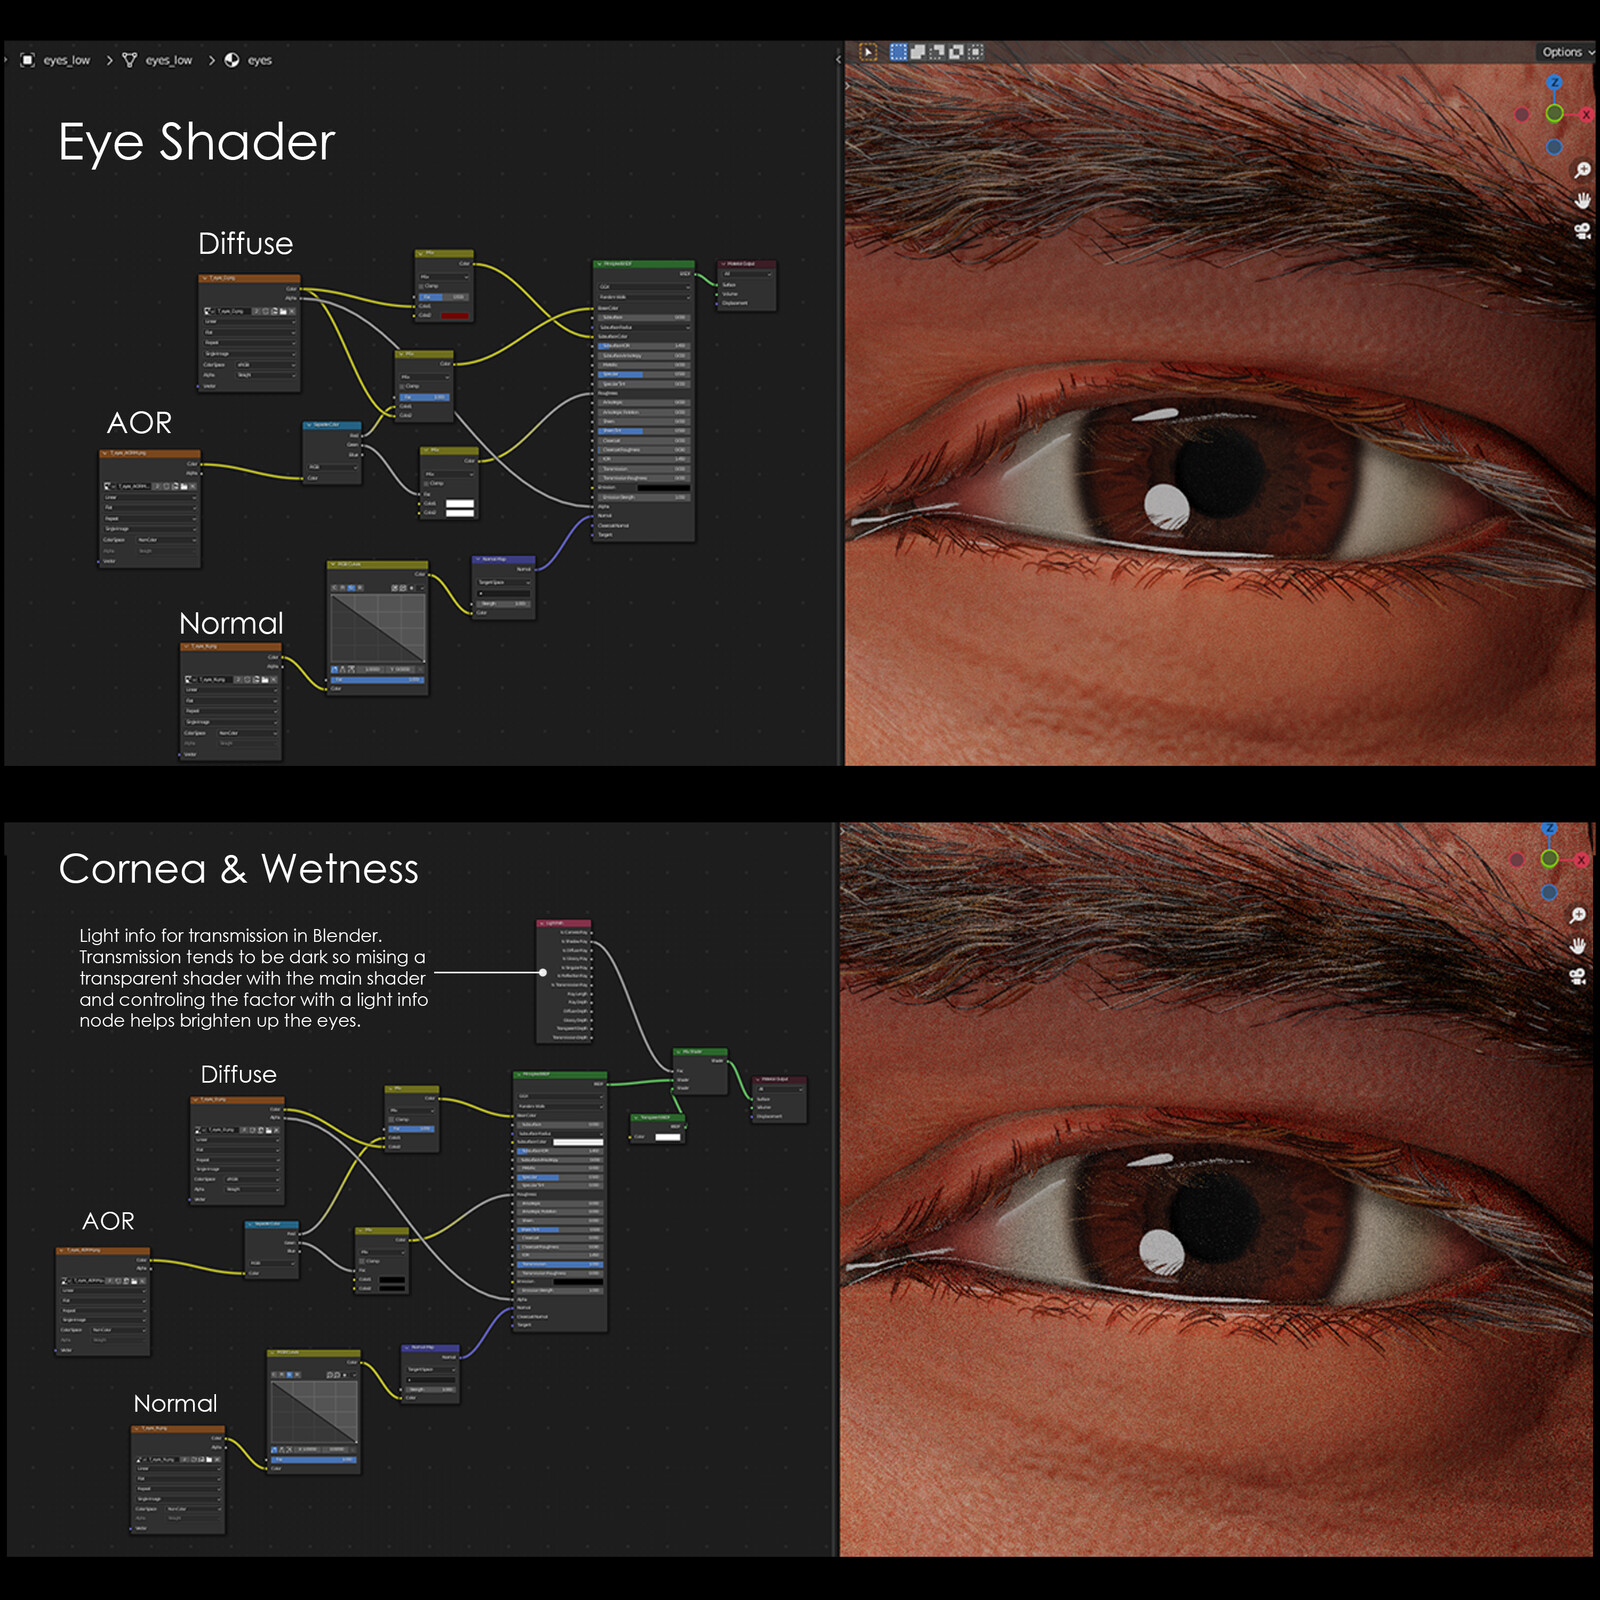 The cornea/wetness and eye shader actually share the same texture set, Here I just copied the eye shader setup on a new shader for the transmission and wetness. So technically the textures aren't needed for the Cornea &amp; wetness. 